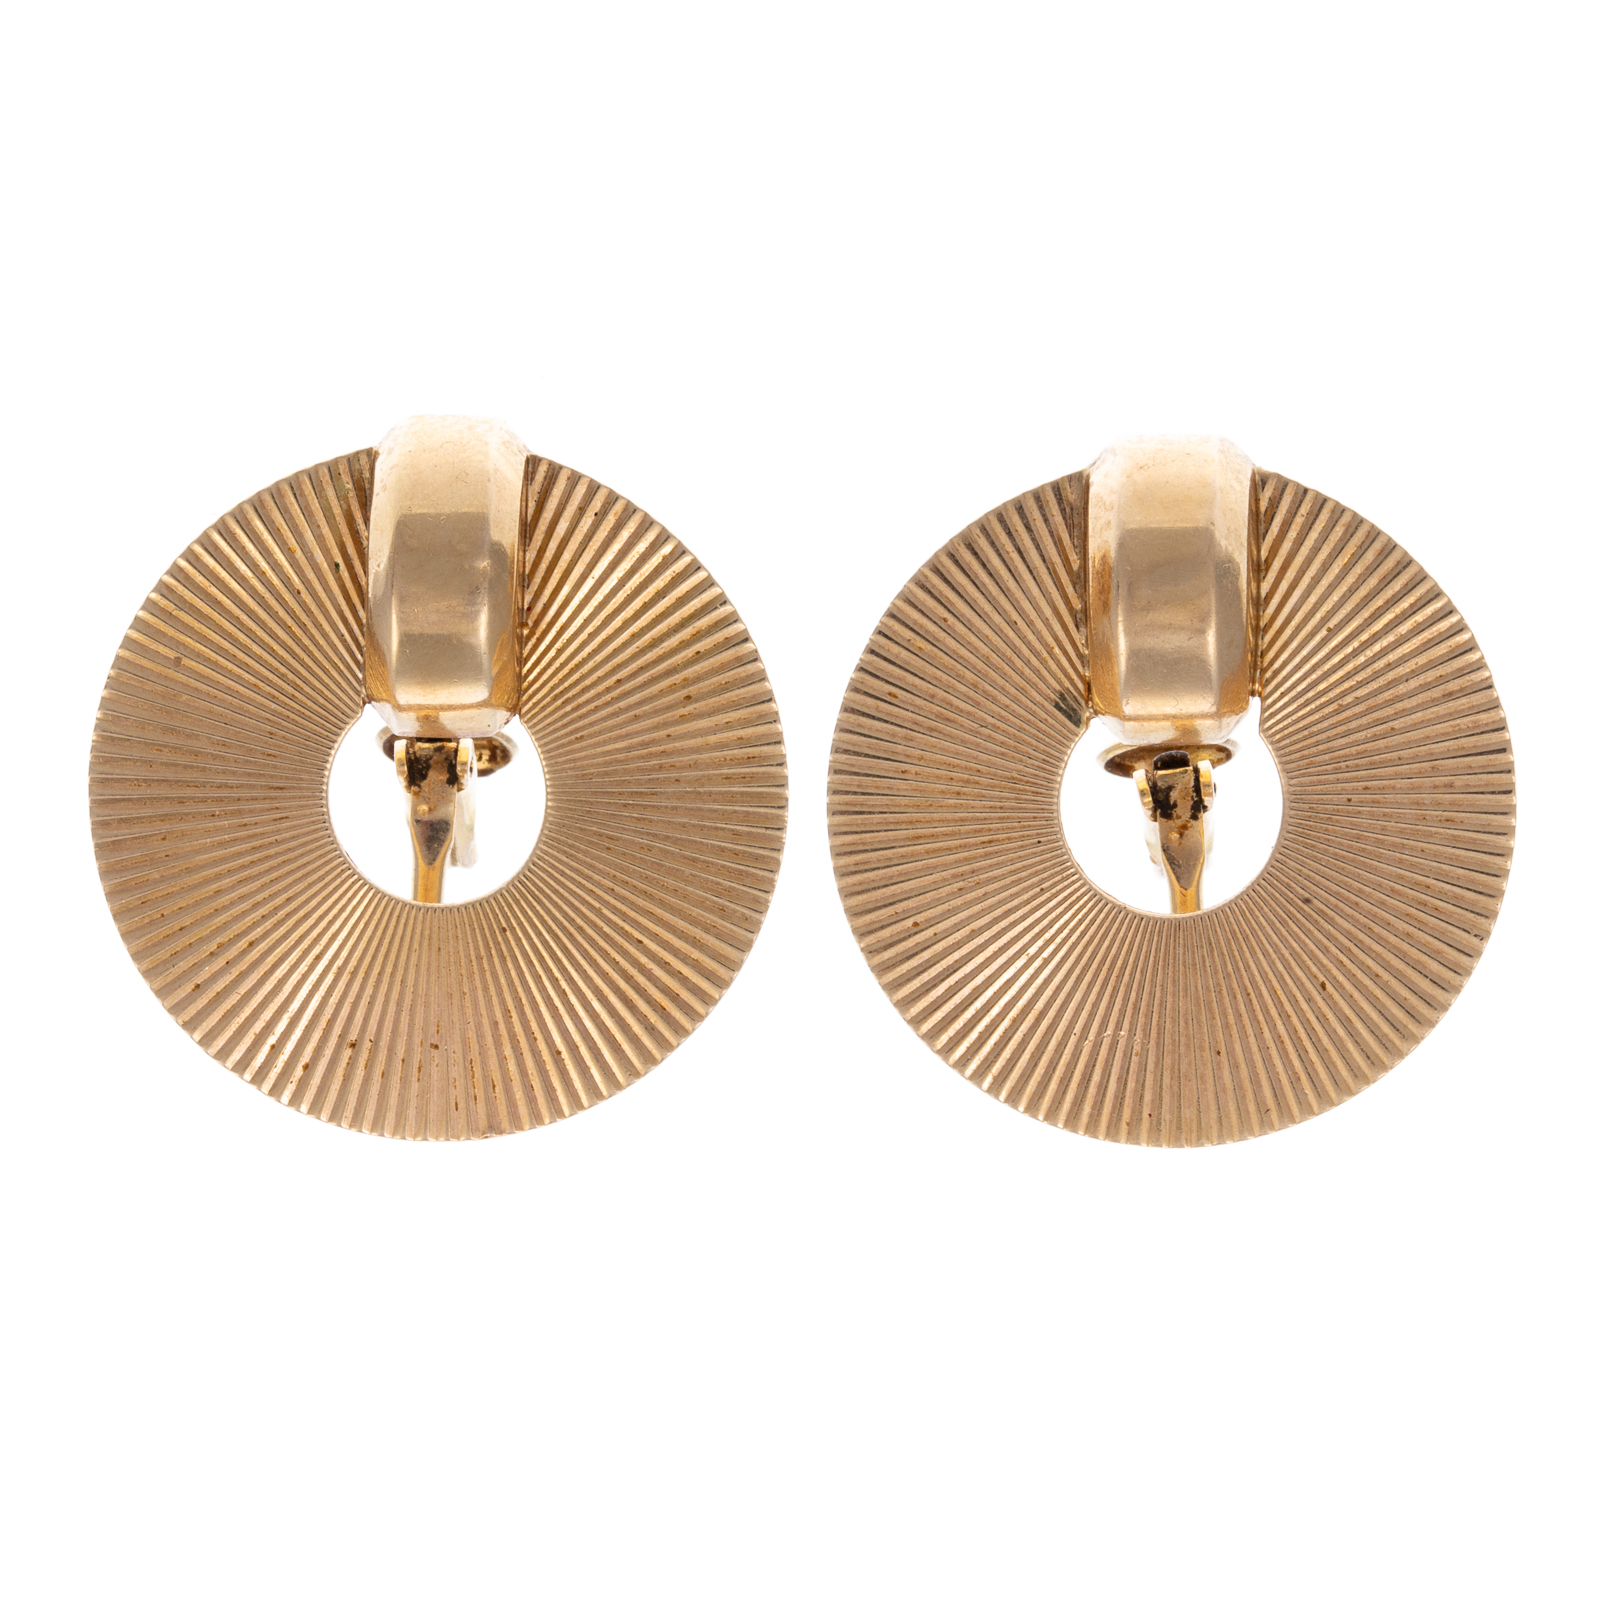 A PAIR OF ROUND RETRO EARRINGS